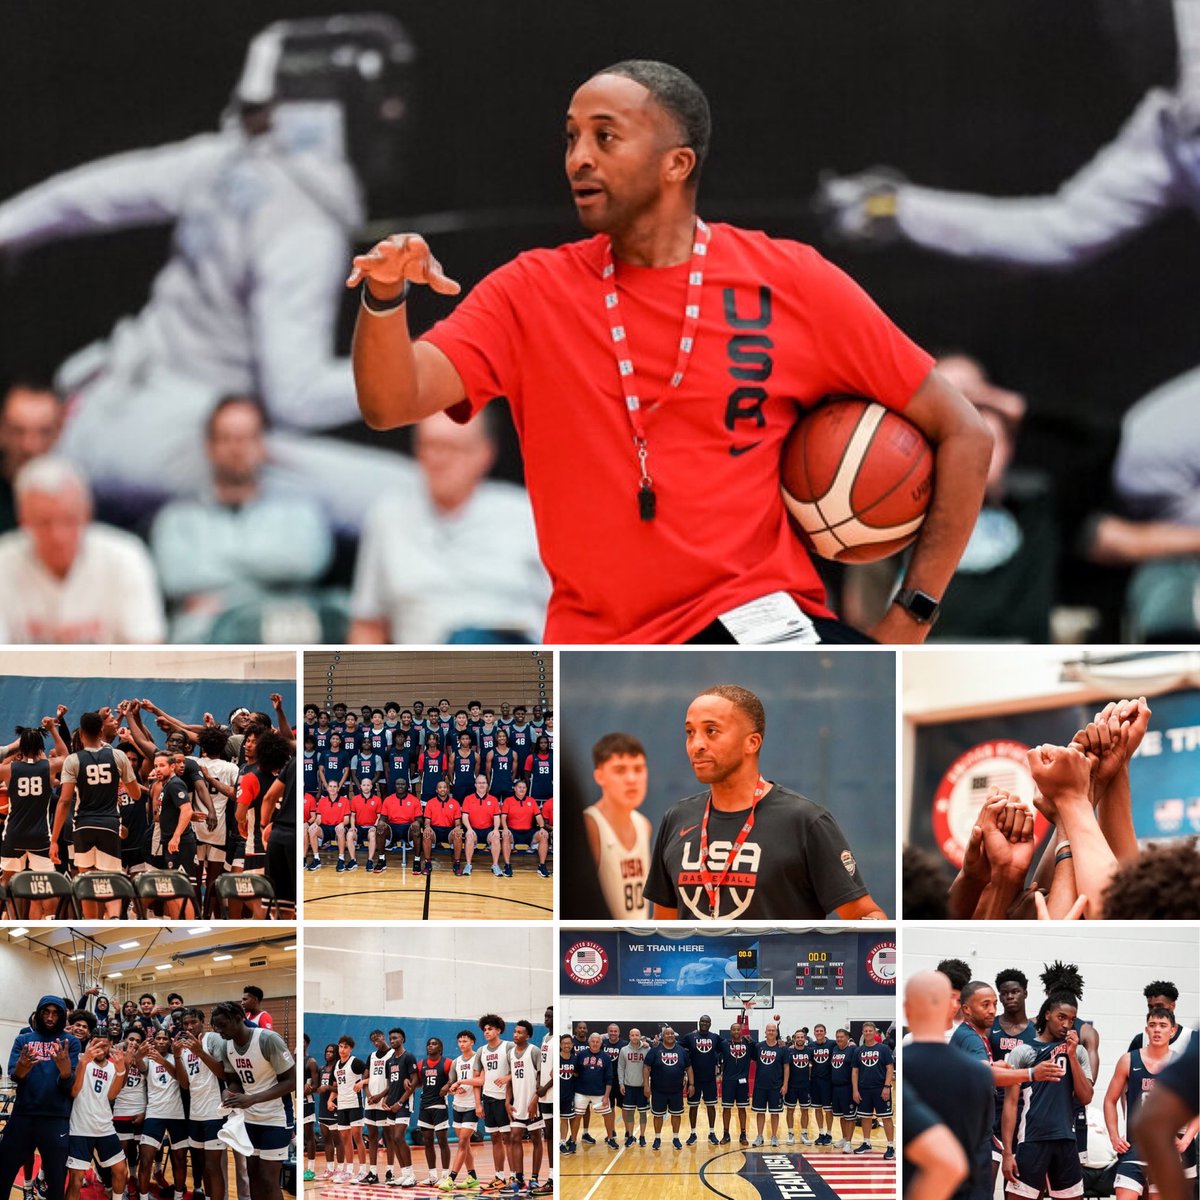 Incredible weekend in Colorado Springs with an ELITE level of players and coaches for the @usabjnt October Minicamp!! Honored to be apart of!!! #BestCultureInBasketball🇺🇸🏀💪🏾 #GoldHabits